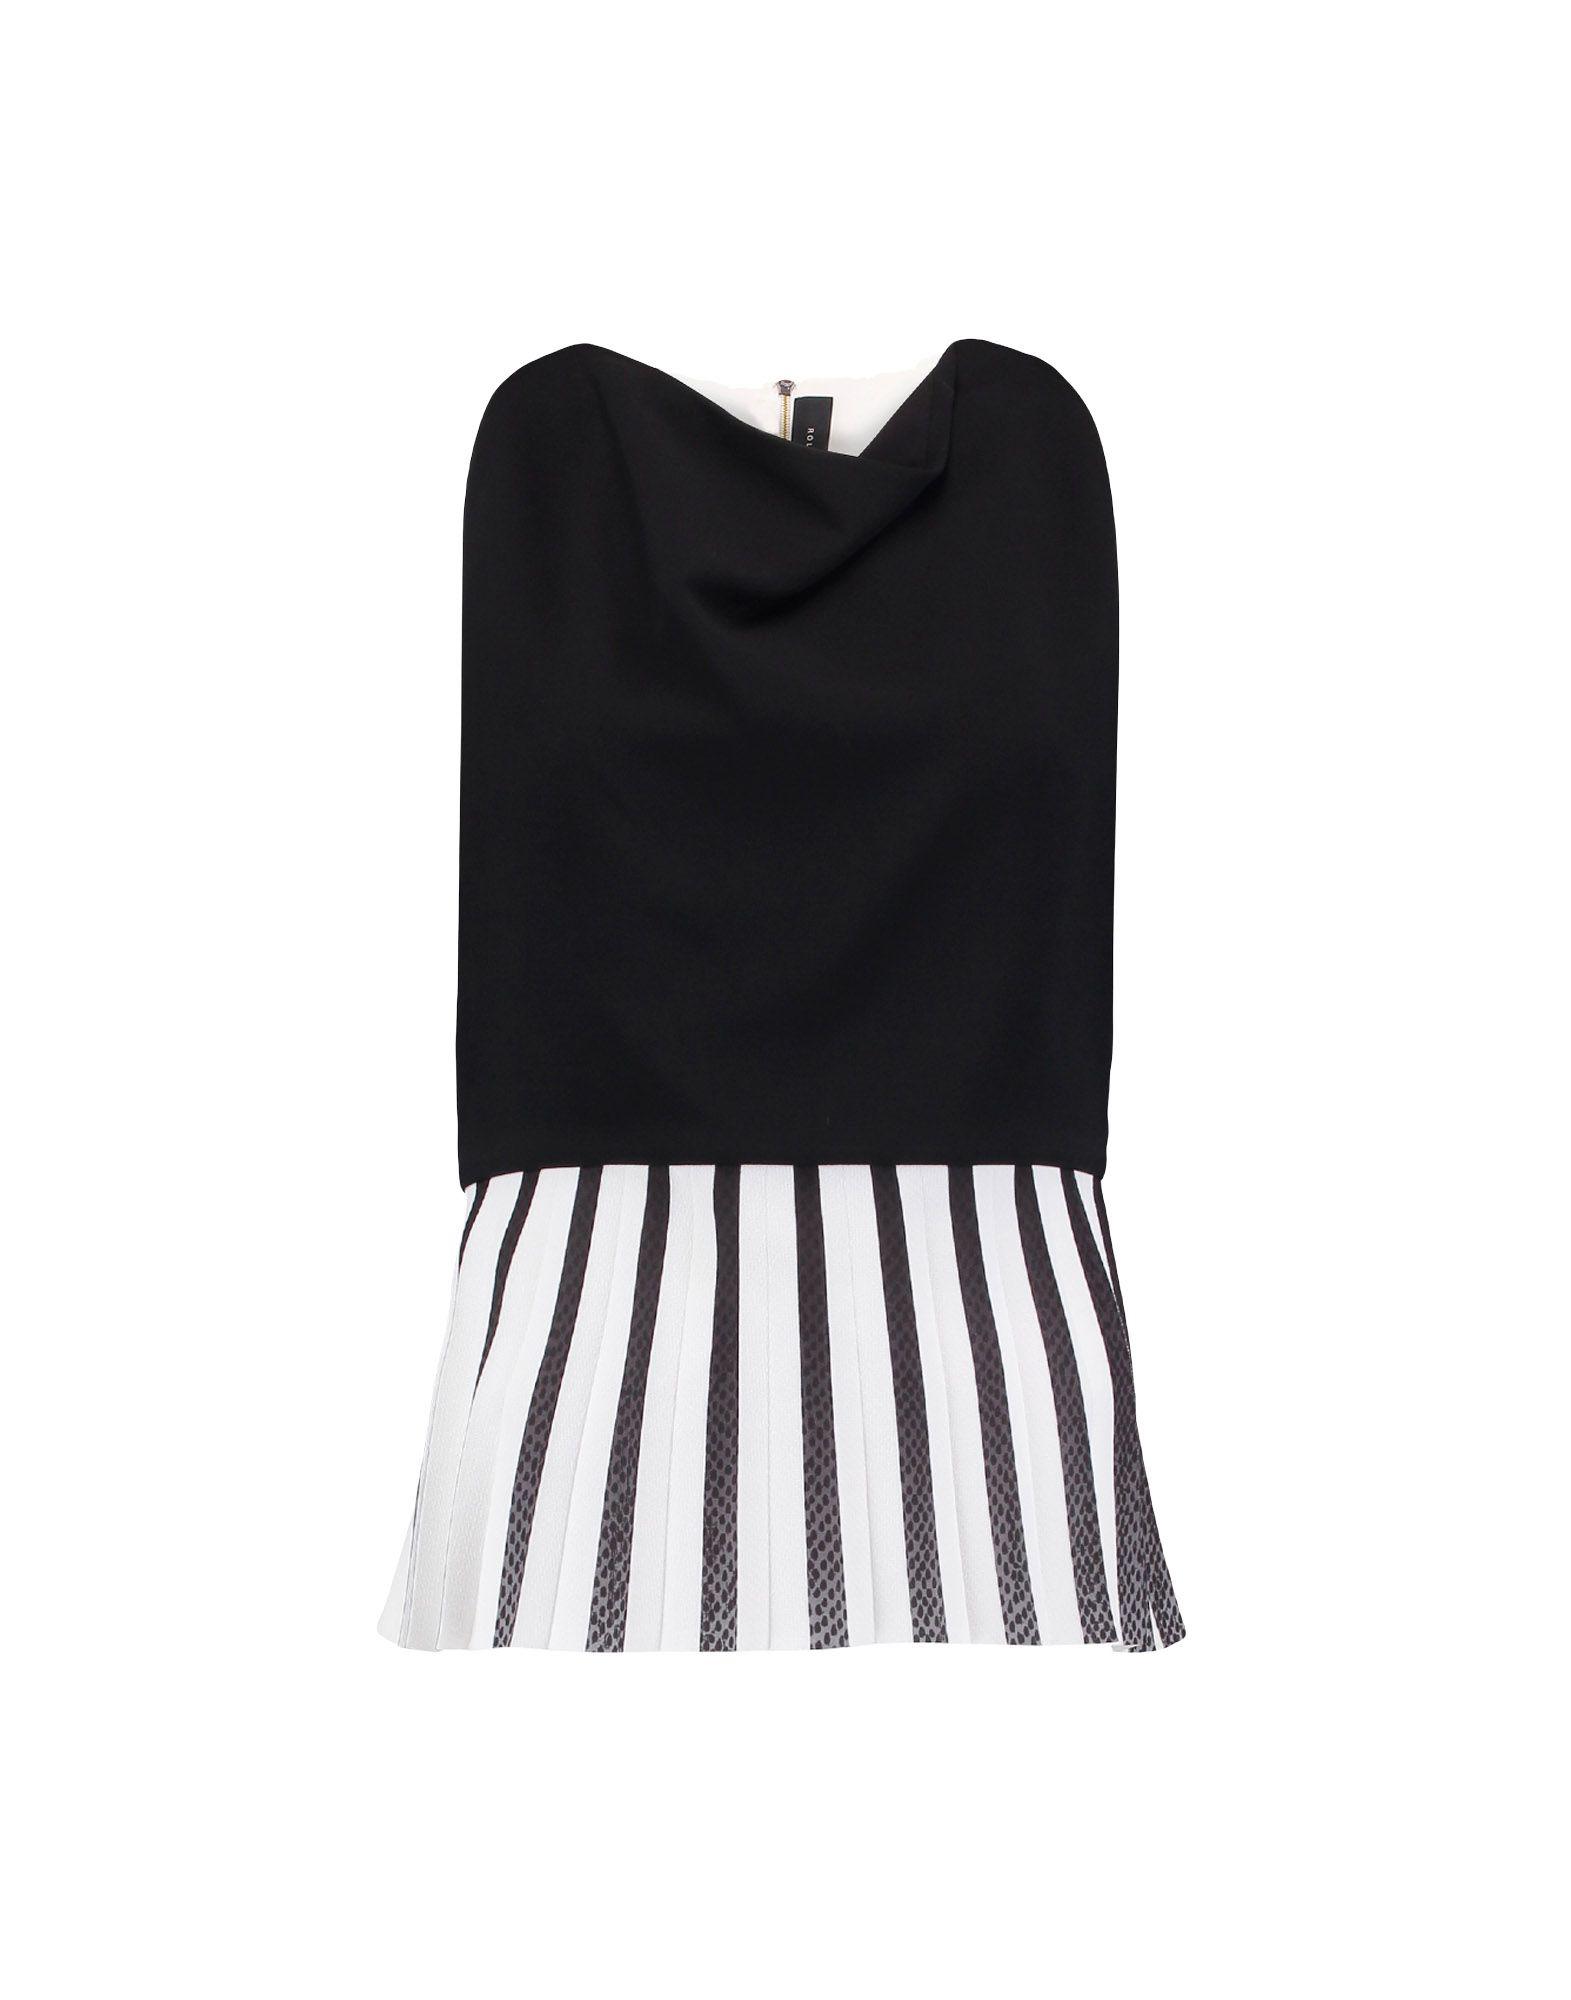 Roland Mouret Synthetic Top in Black - Lyst